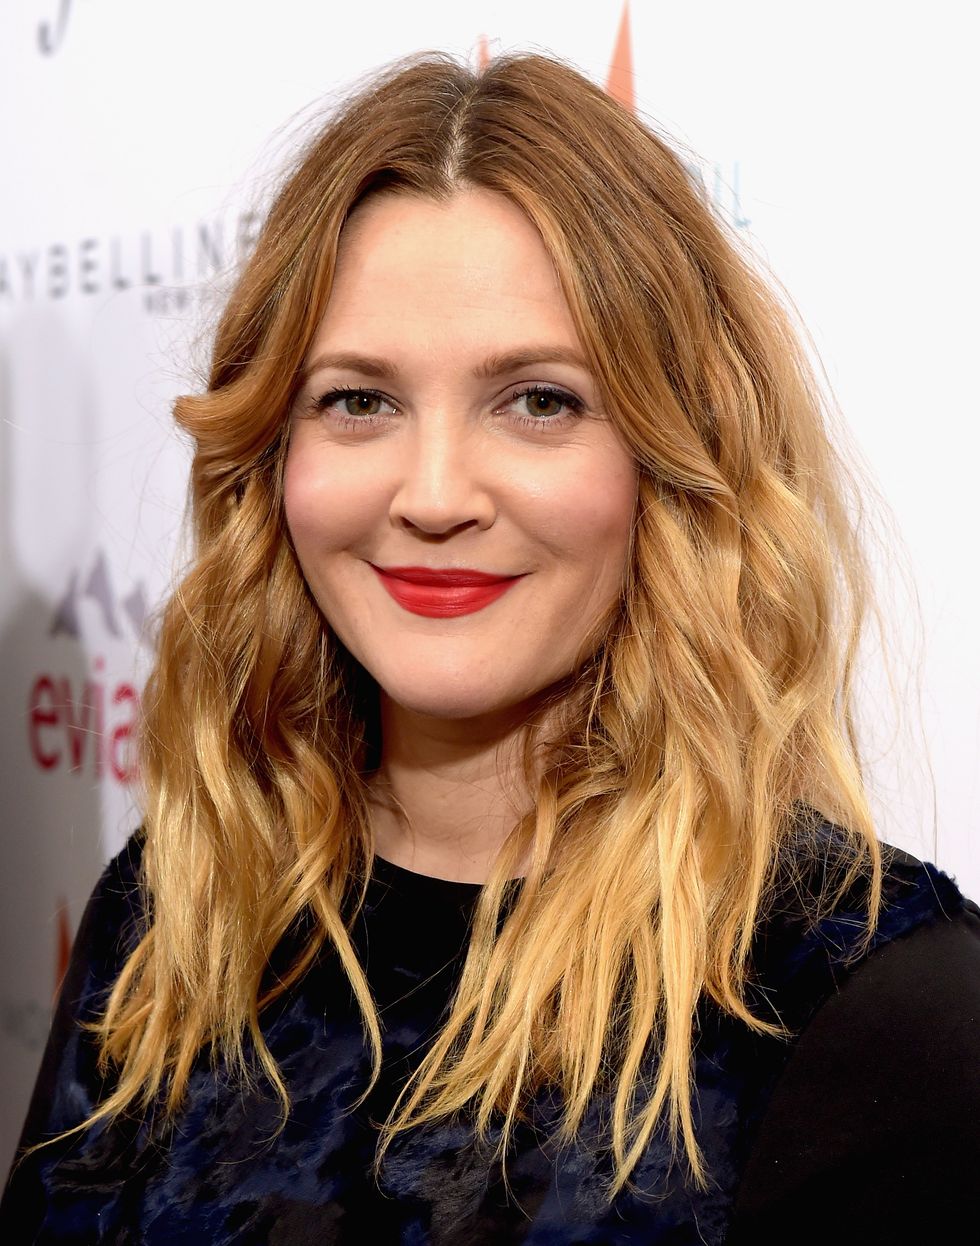 WEST HOLLYWOOD, CA - JANUARY 22:  Actress Drew Barrymore attends The DAILY FRONT ROW 